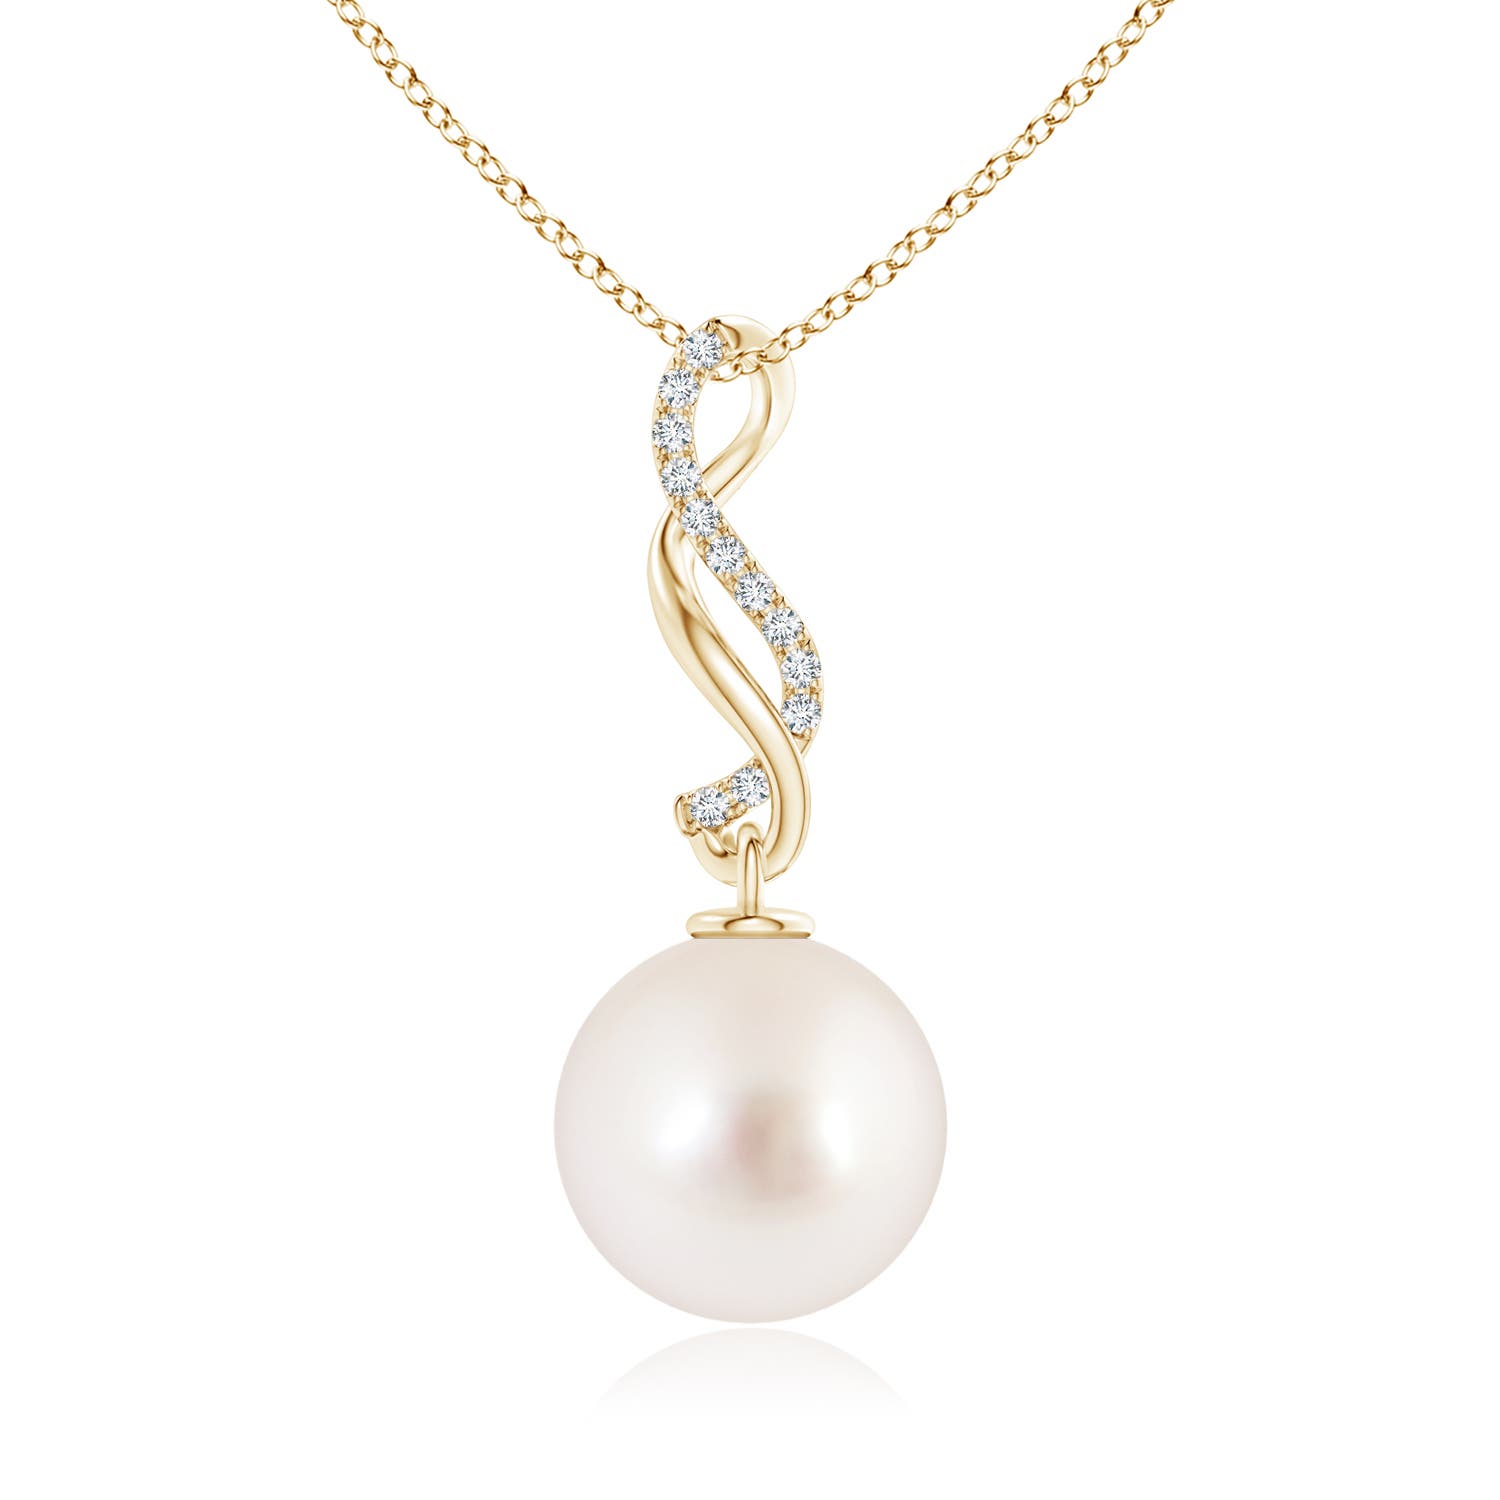 AAAA - South Sea Cultured Pearl / 7.26 CT / 14 KT Yellow Gold